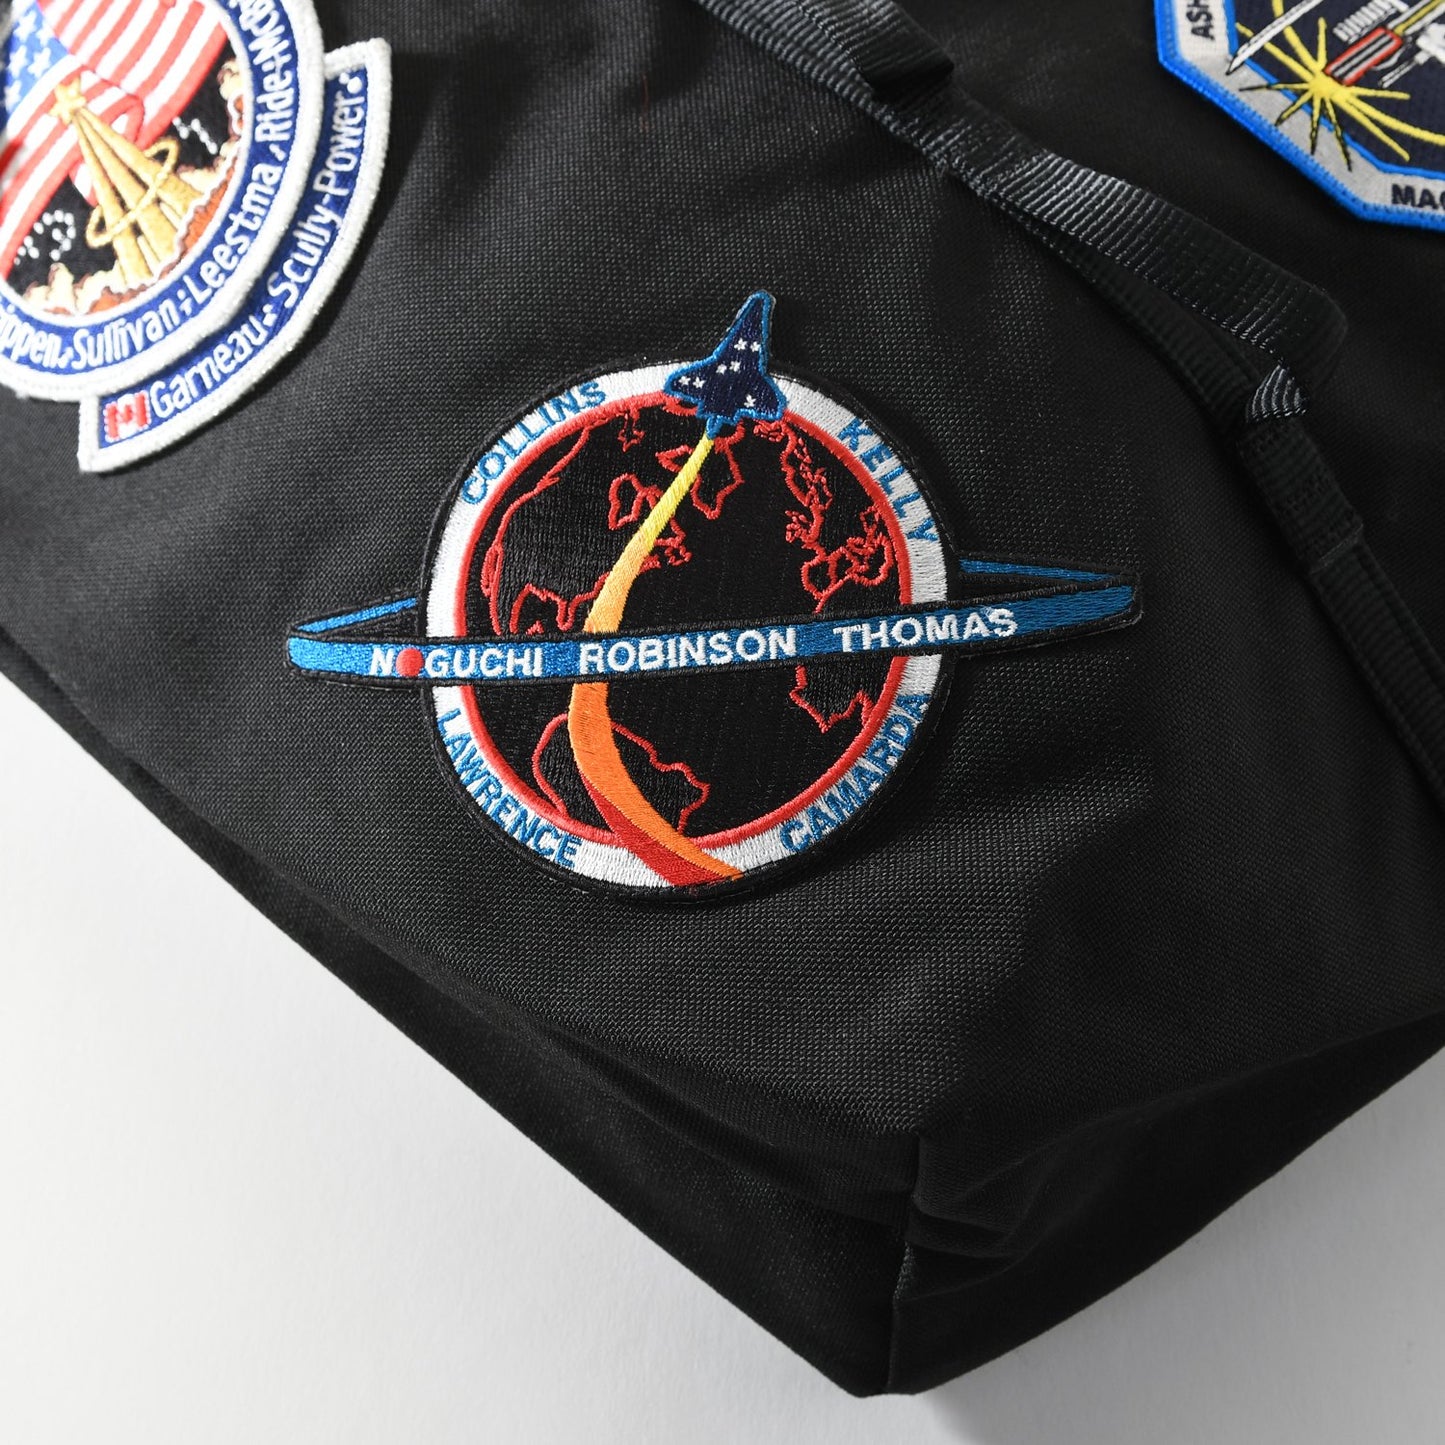 Epperson Mountaineering - Large Climb Tote with Vintage NASA Patch MIL SPEC BLACK